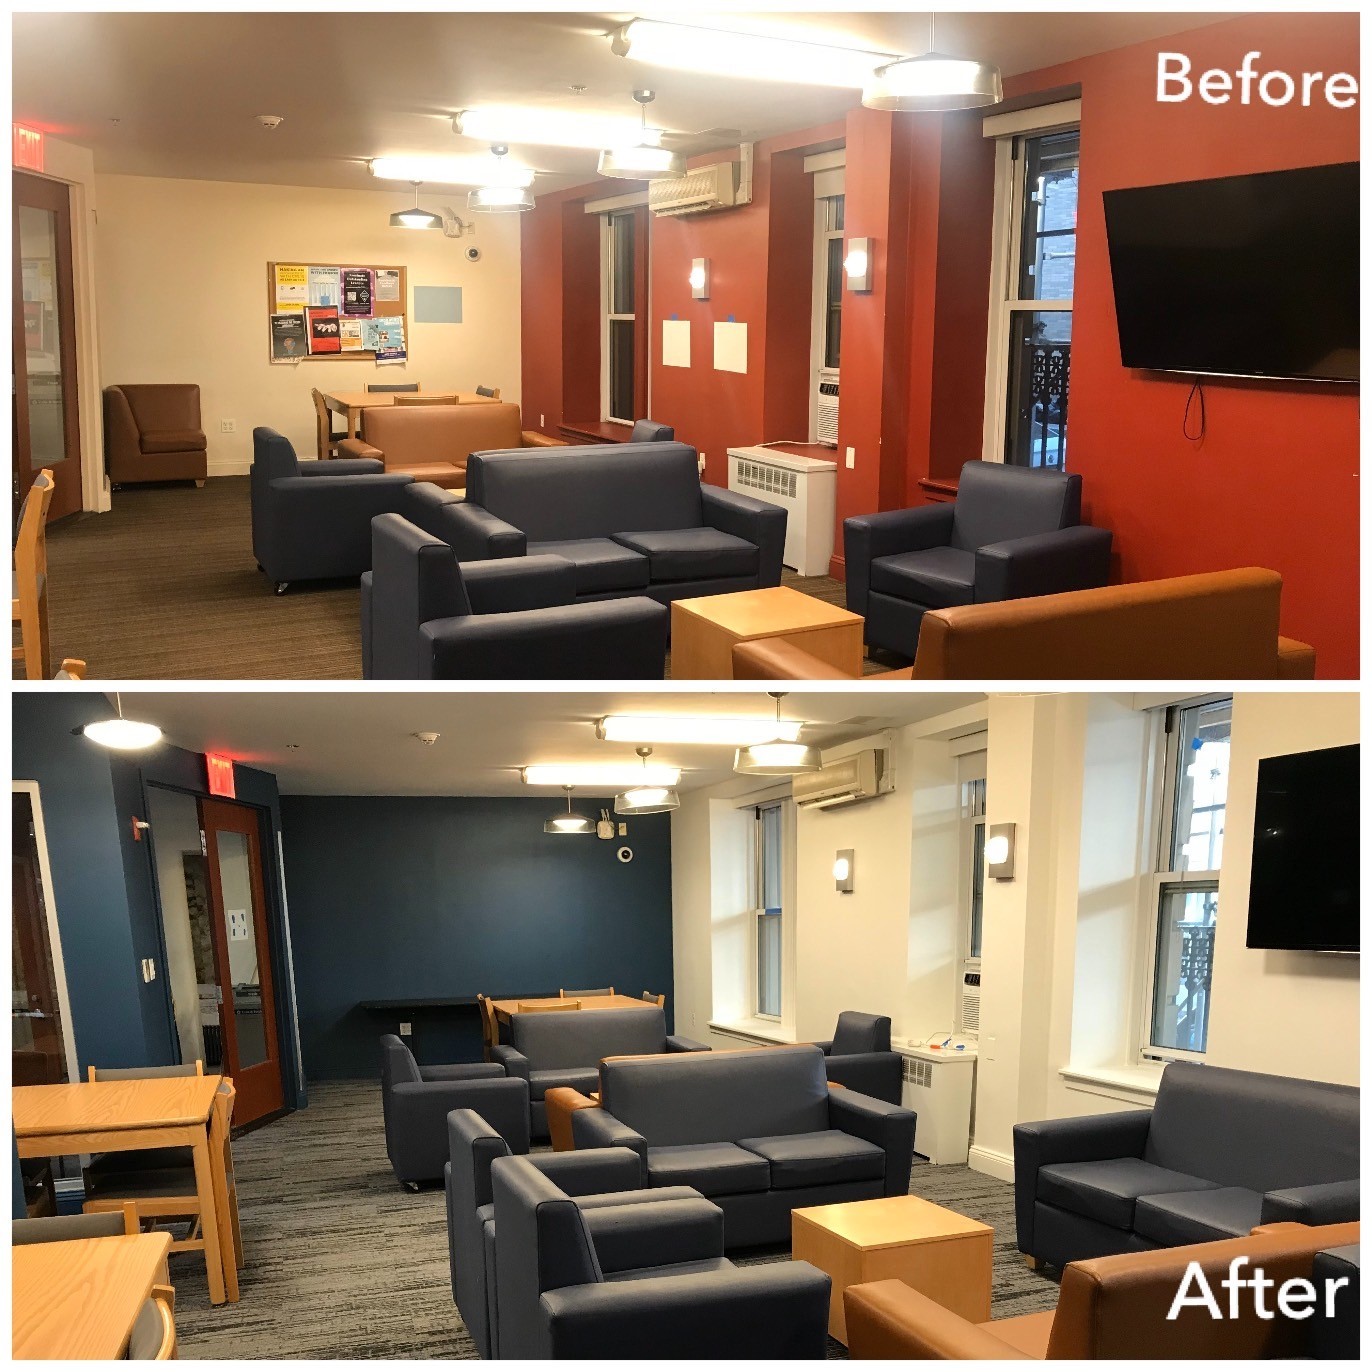 The McBain lounge was refreshed with new carpeting and paint.